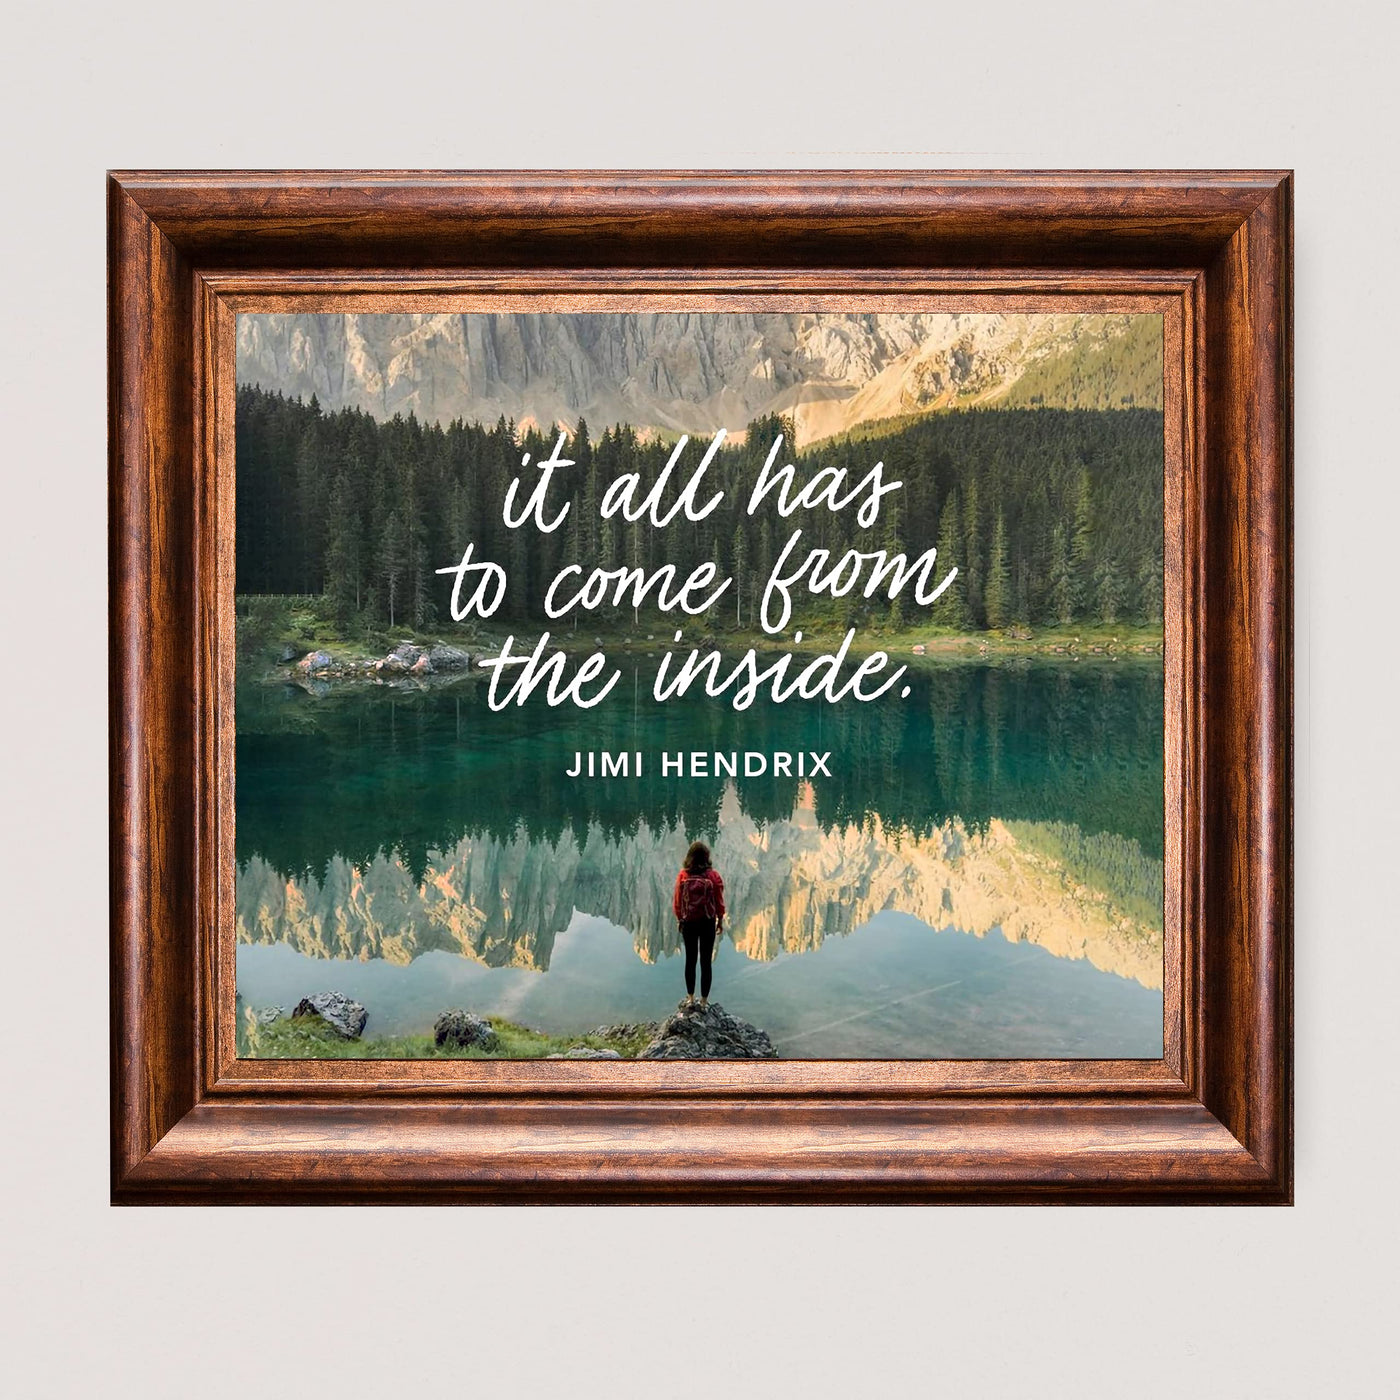 Jimi Hendrix Quotes-"It All Has to Come From the Inside" Inspirational Wall Art -10 x 8" Typographic Mountain Lake Photo Print-Ready to Frame. Home-Office-Studio-Dorm Decor. Great Quote for Fans!